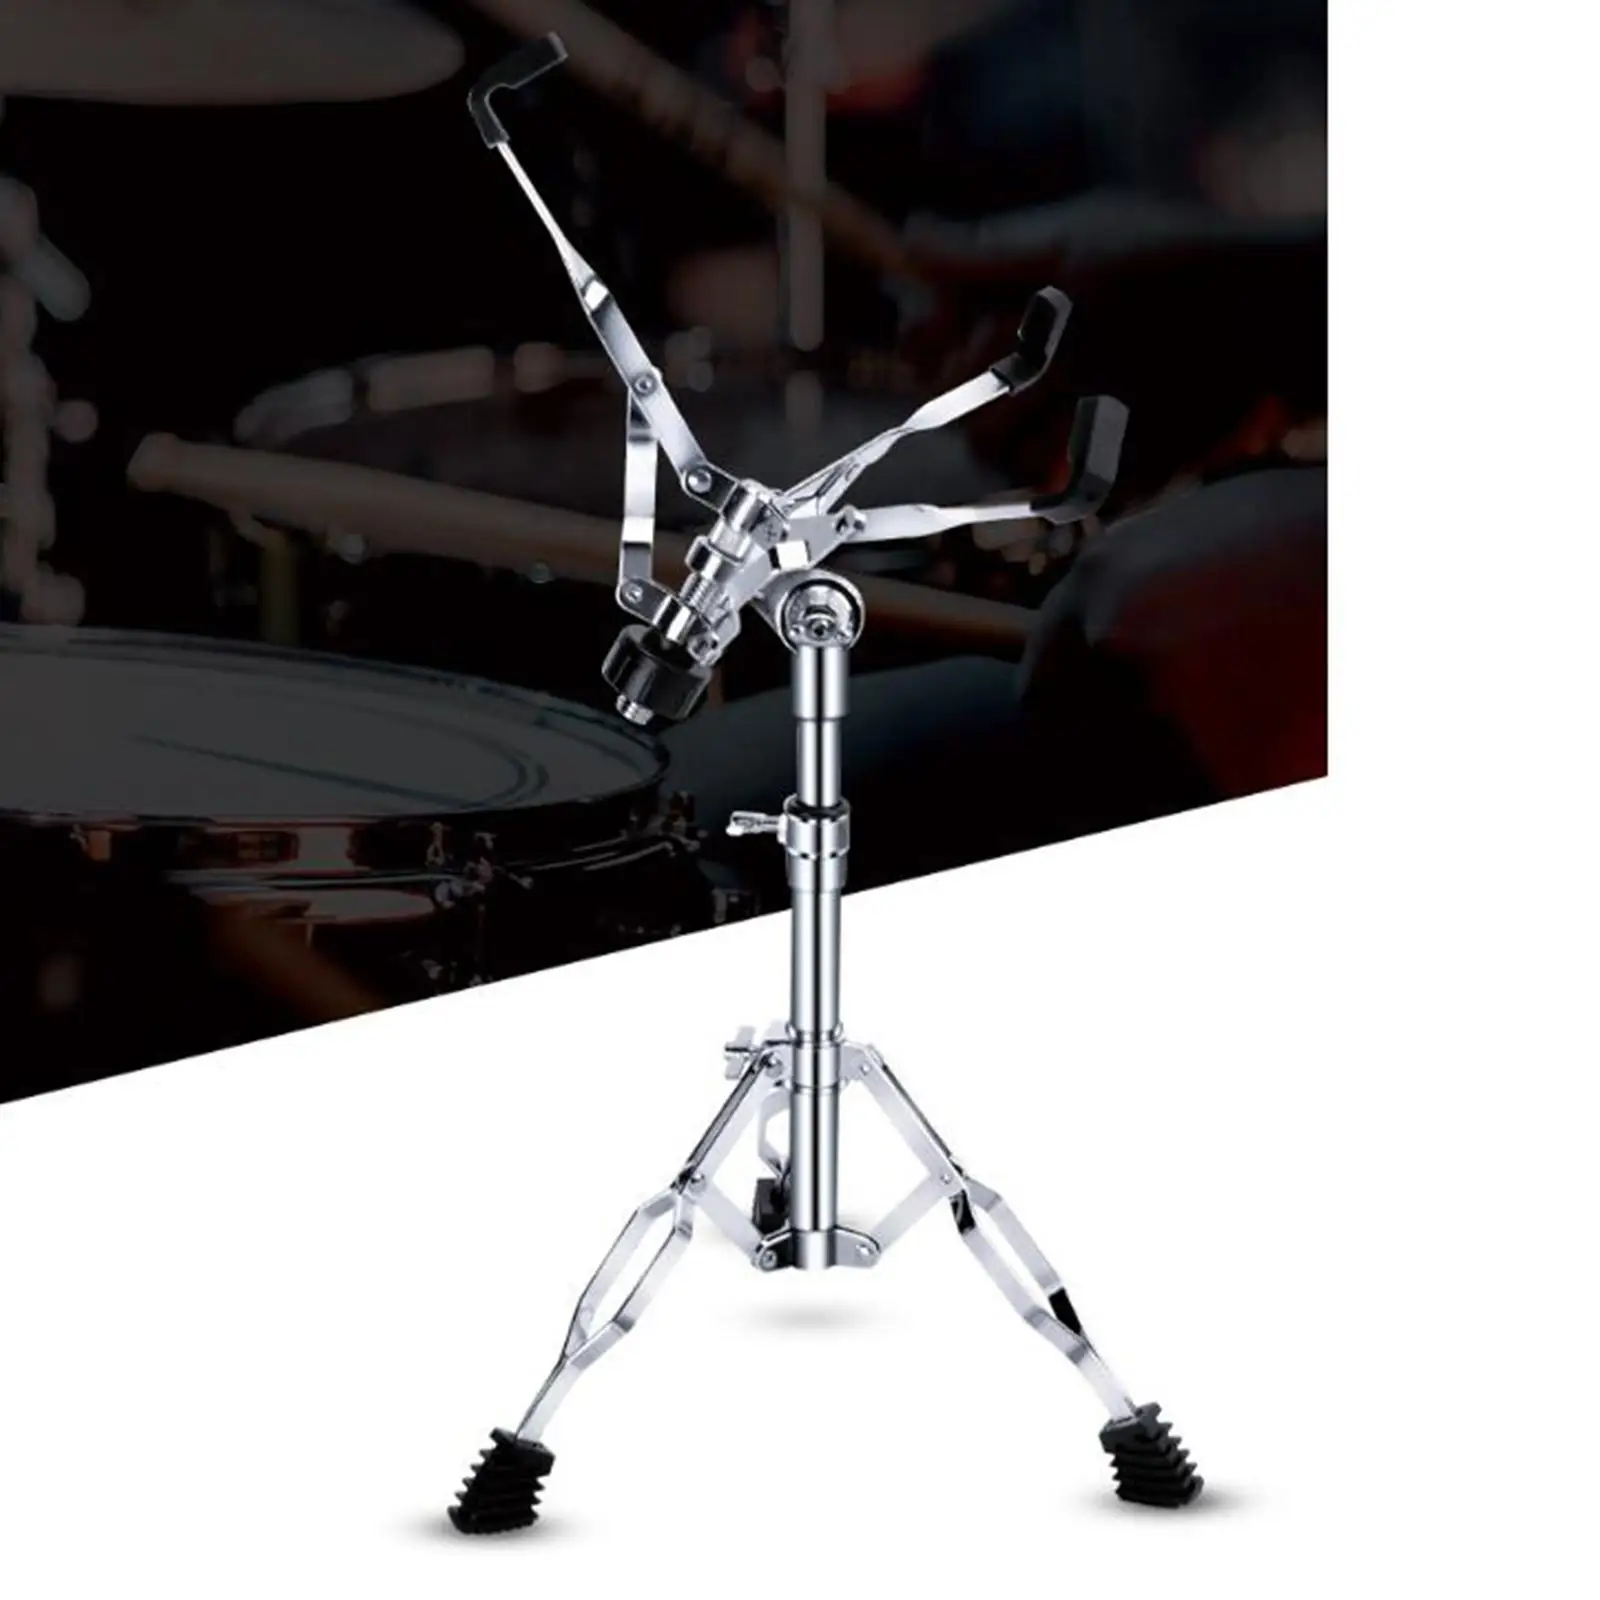 Snare Drum Stand Height Adjust Drum Pad Stand for Musical Instrument Accessory 12inch~14inch Dia Drums Snare Drum Beginners